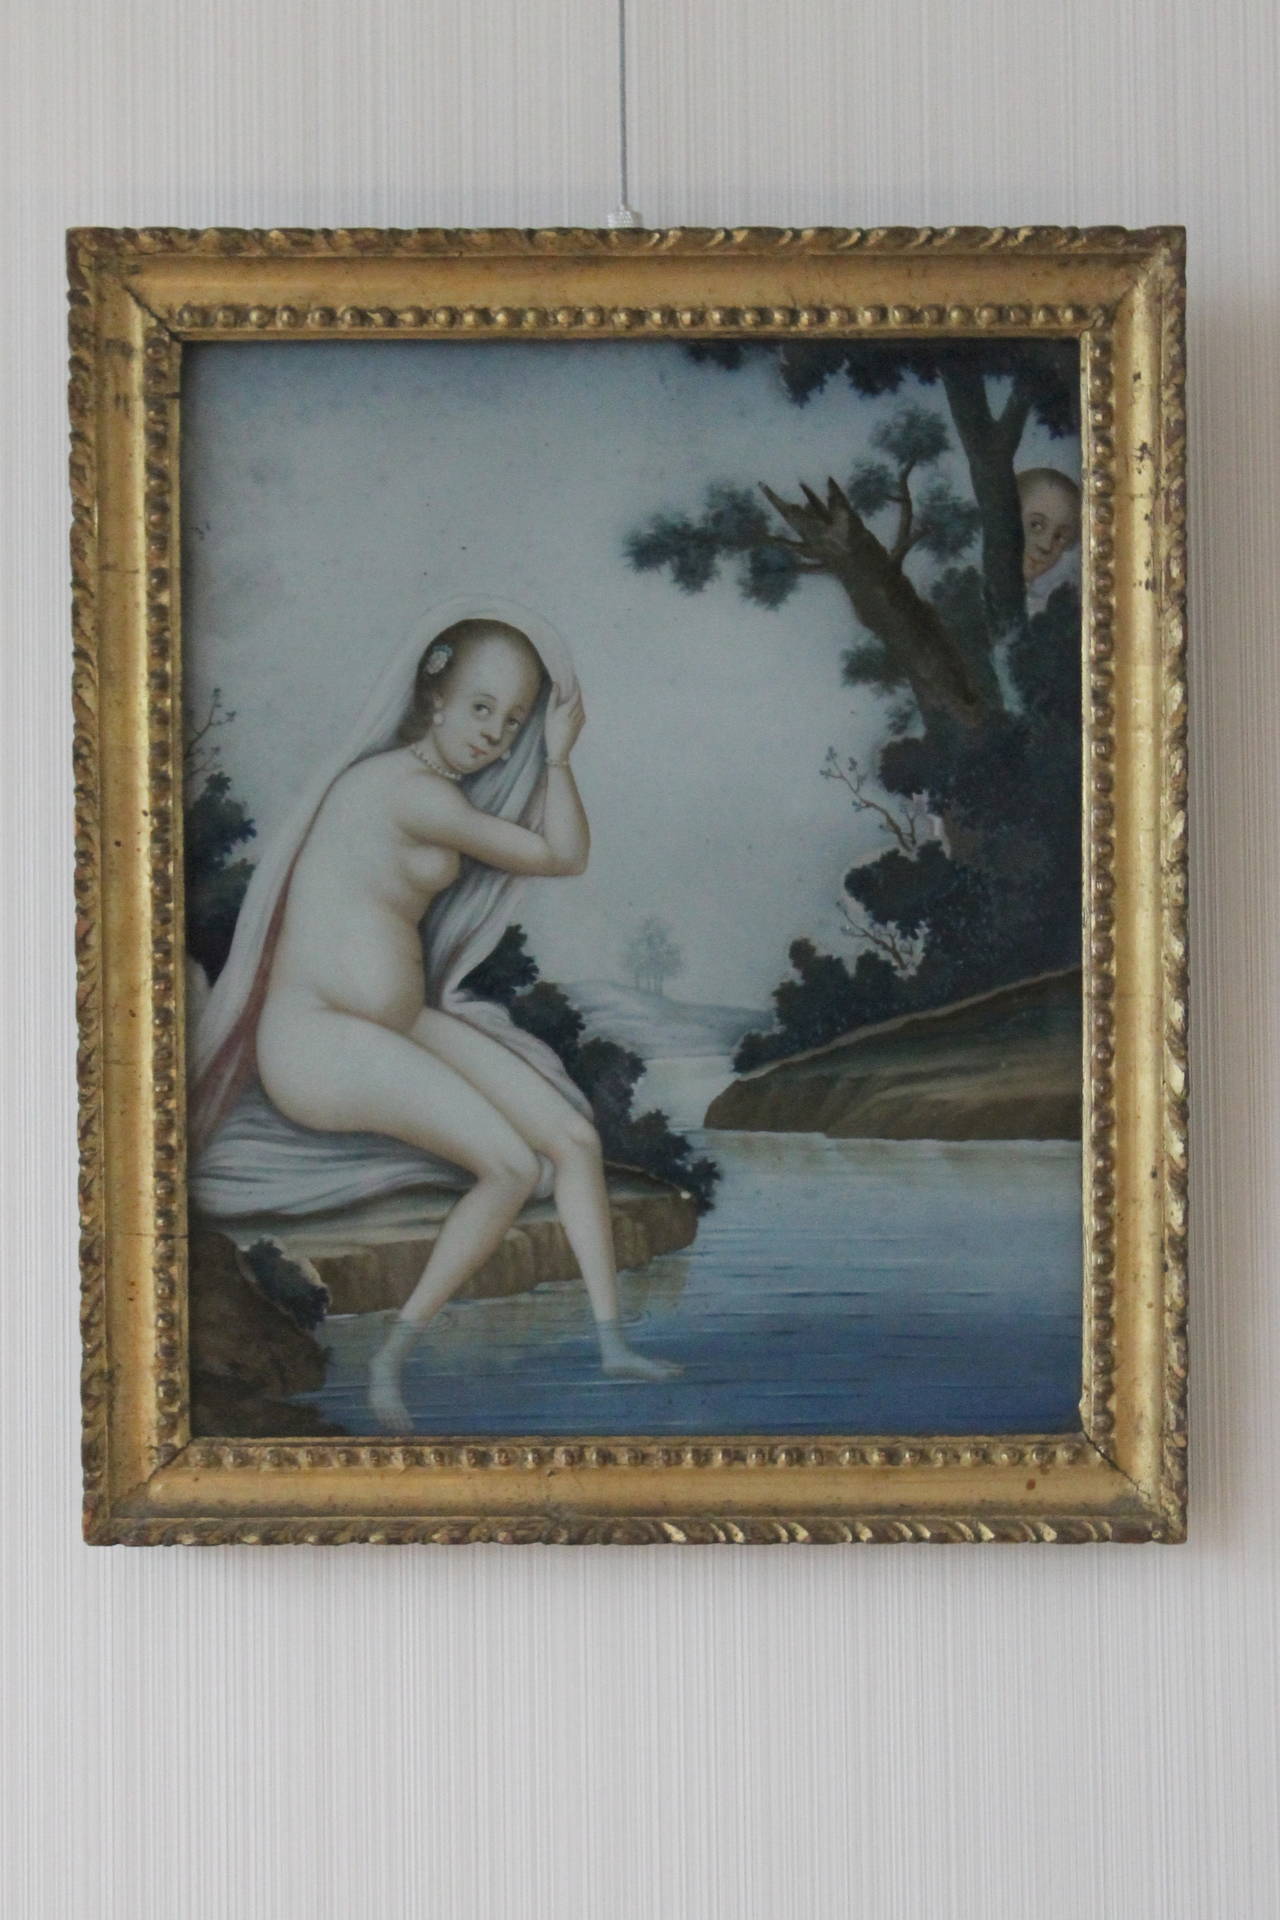 Pair of Chinese export European subject reverse paintings on glass, each painted with a lady bathing at the side of the river with her feet below the water line, one with her washing her feet, the other with the lady drying her hair beside rockwork